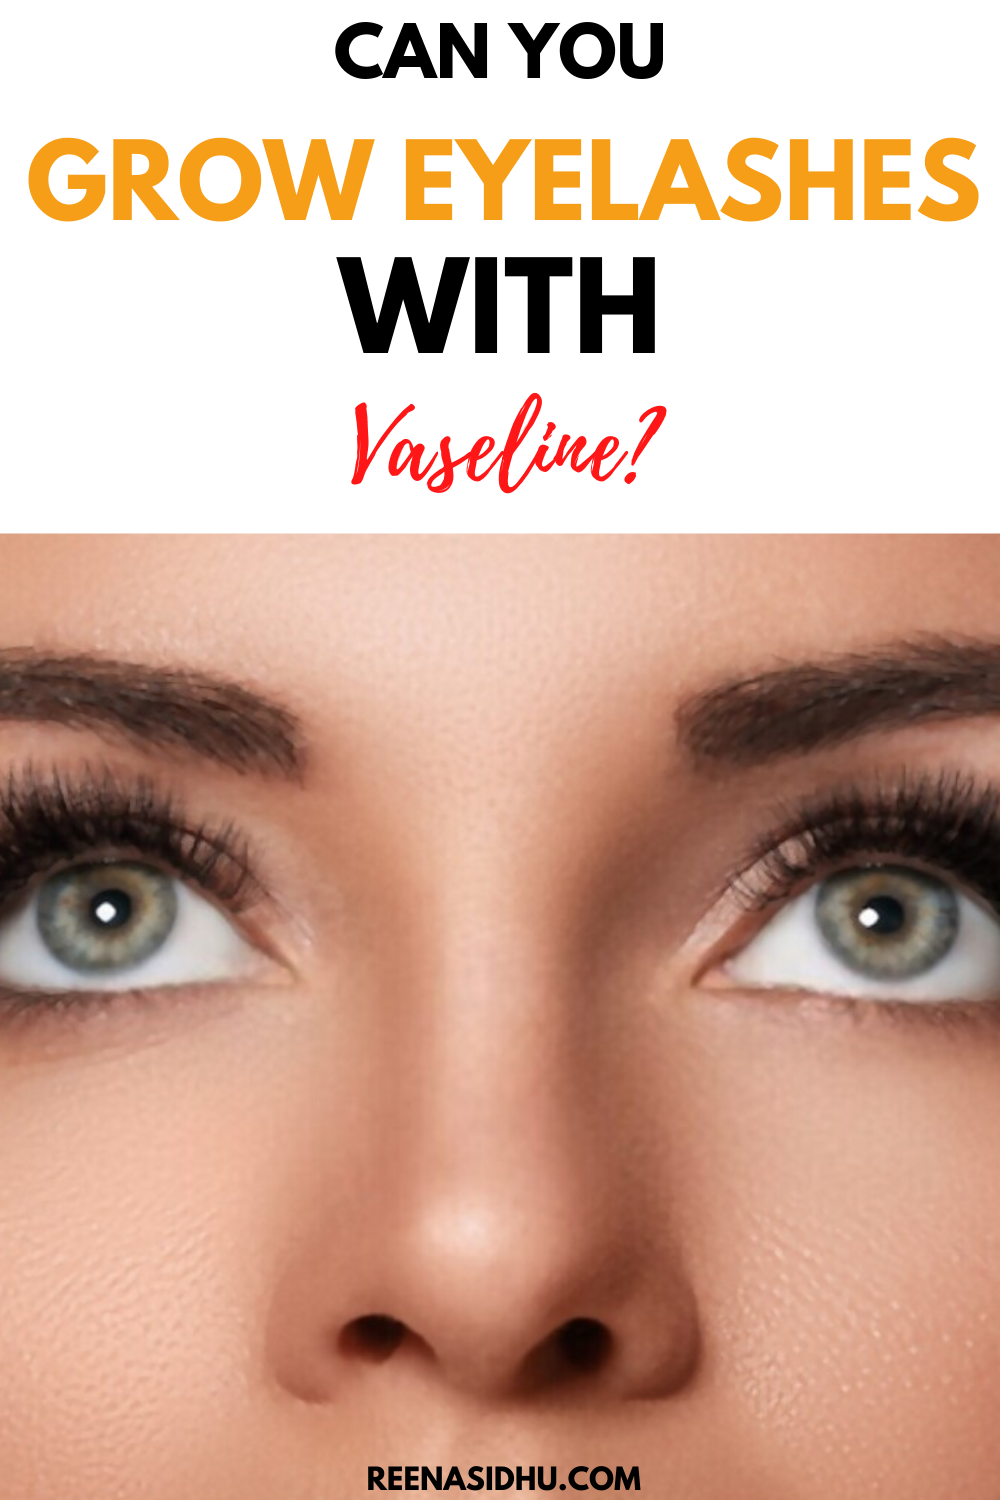 Can You Grow Eyelashes With Vaseline? - Can You Grow Eyelashes With Vaseline? -   19 beauty Hacks lashes ideas